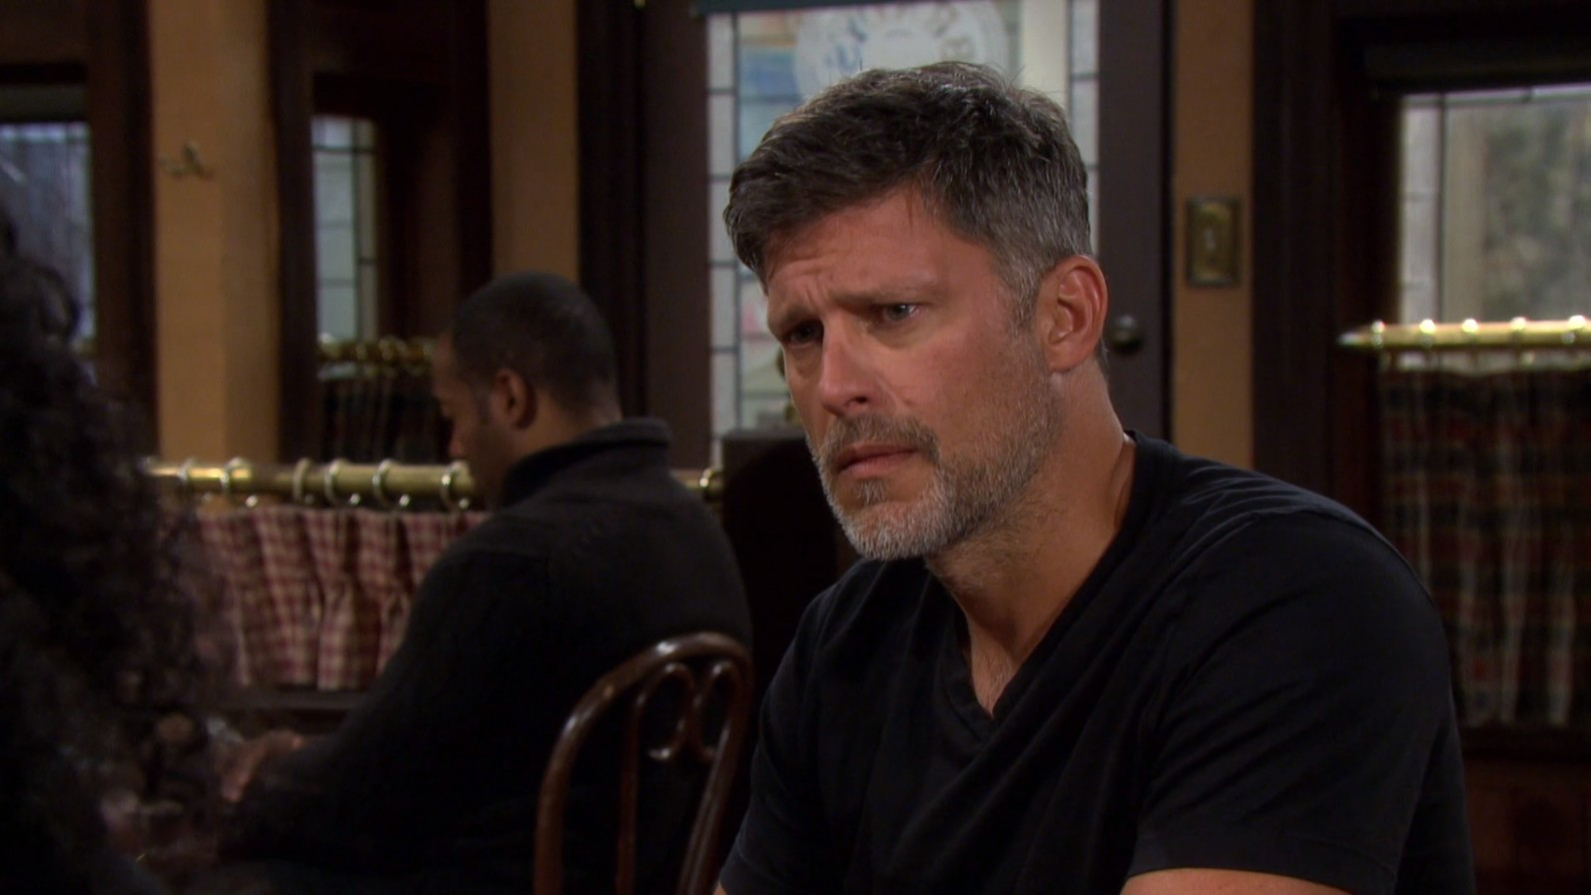 eric heart hurt days of our lives recaps soapsspoilers november 30, 2022